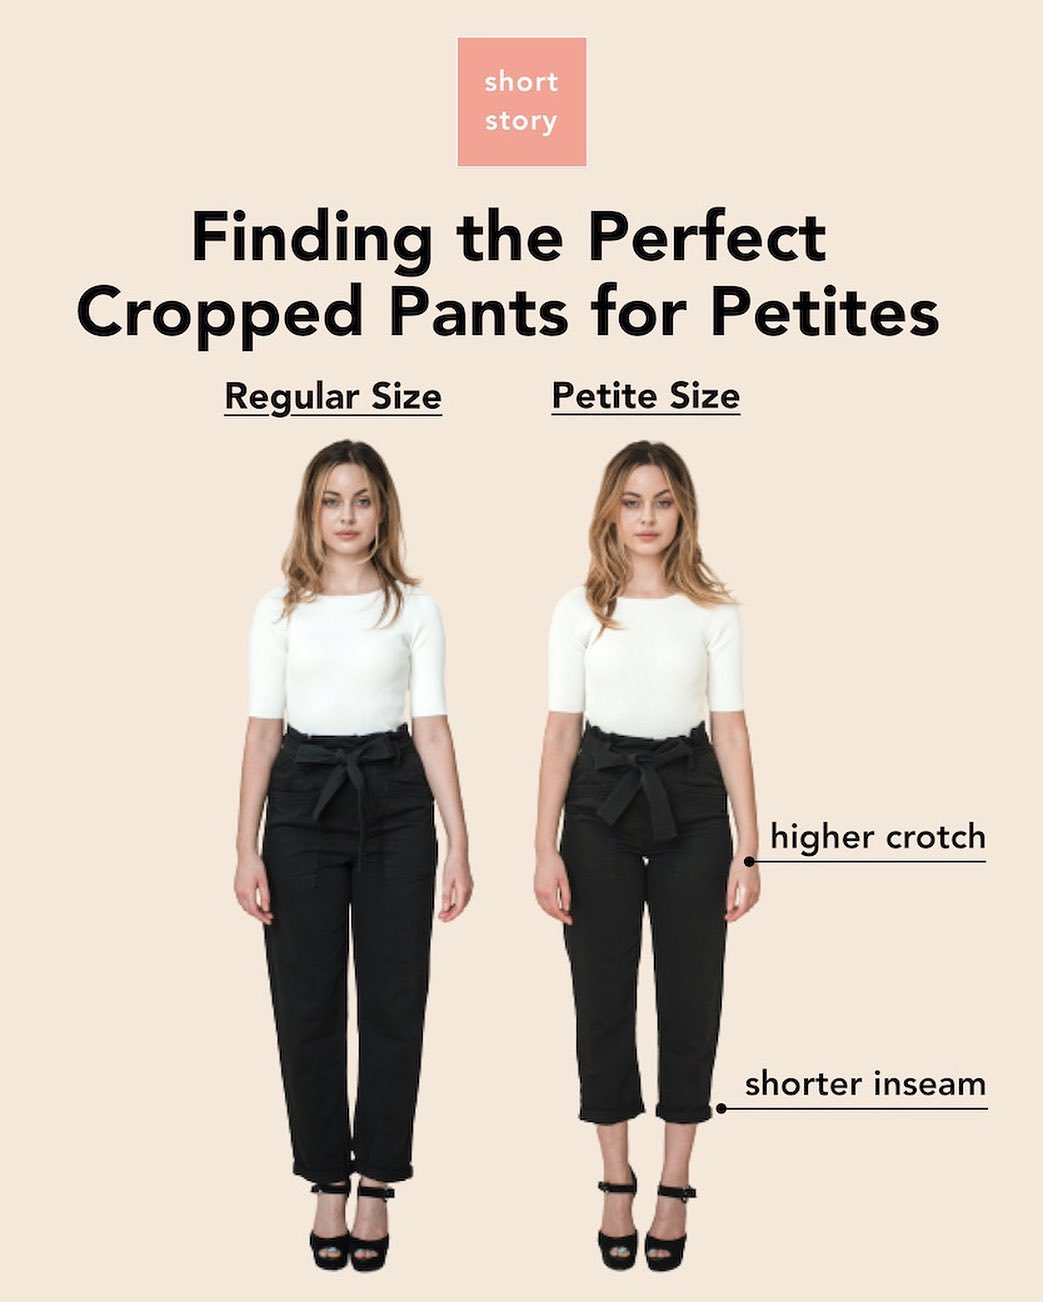 Let's Get Technical: How is Petite Clothing Made Differently?